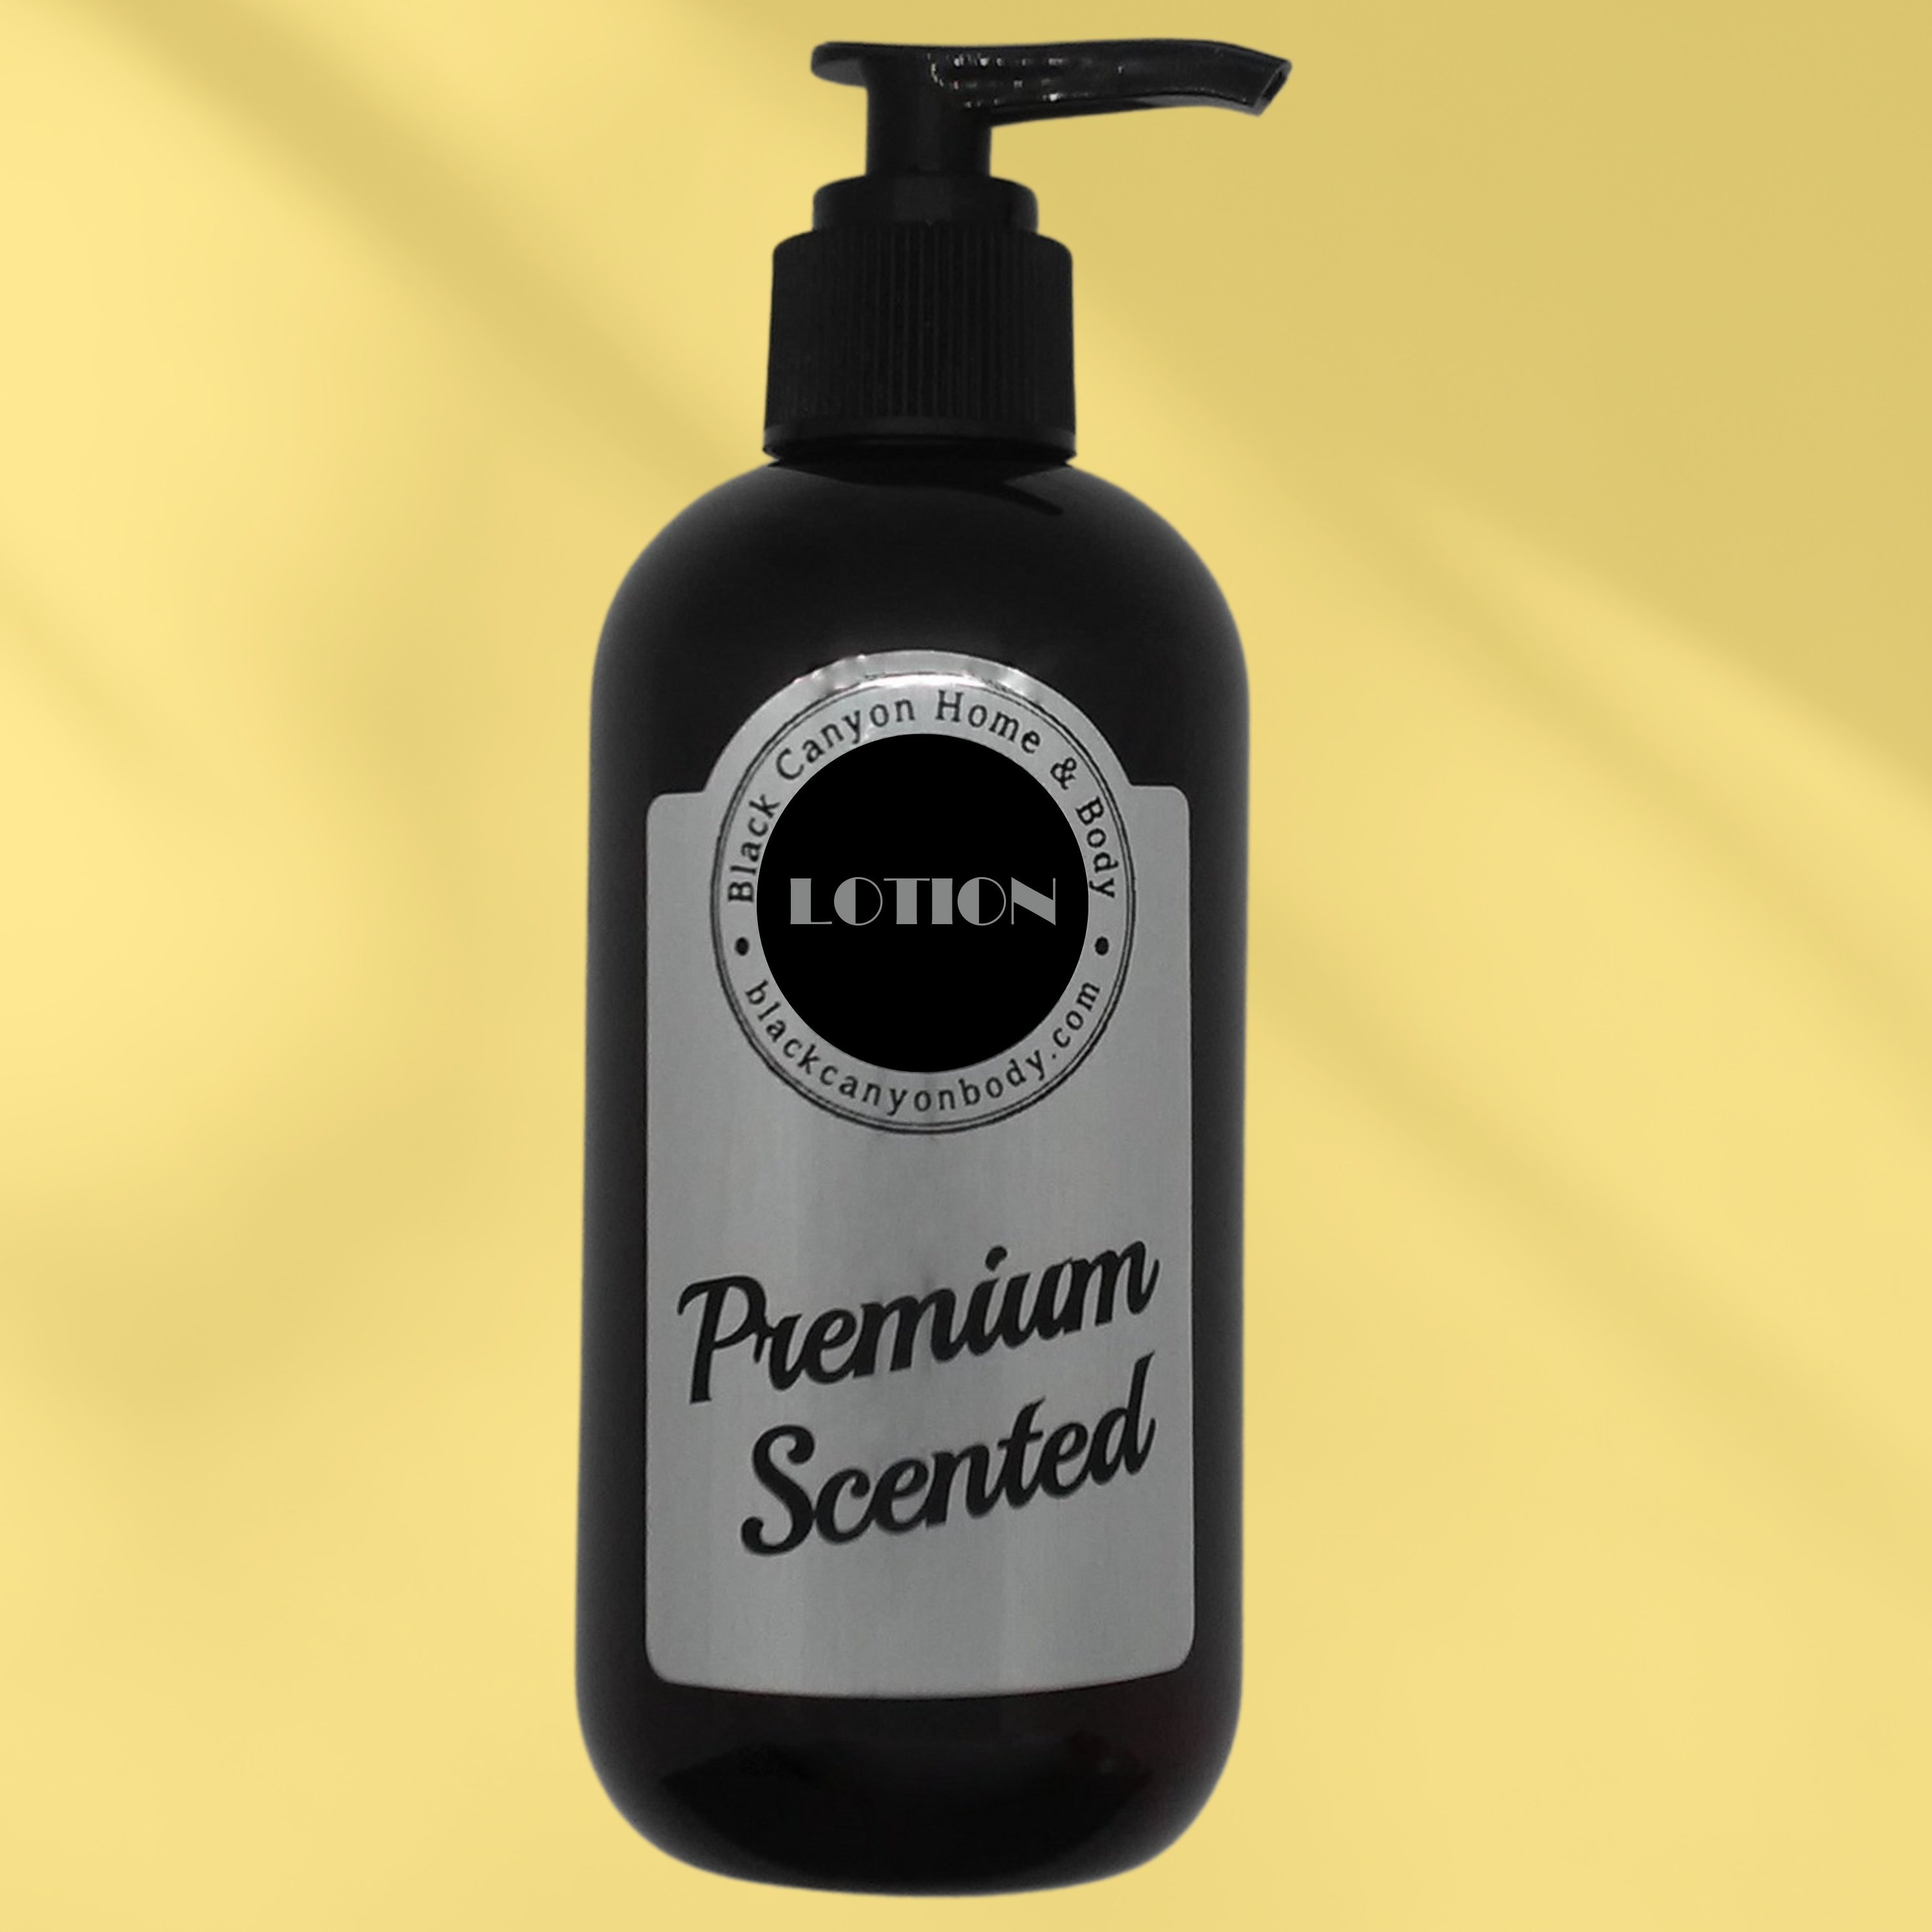 Black Canyon Bergamot & Asiatic Lily Scented Luxury Body Lotion with Lanolin and Jojoba Oil